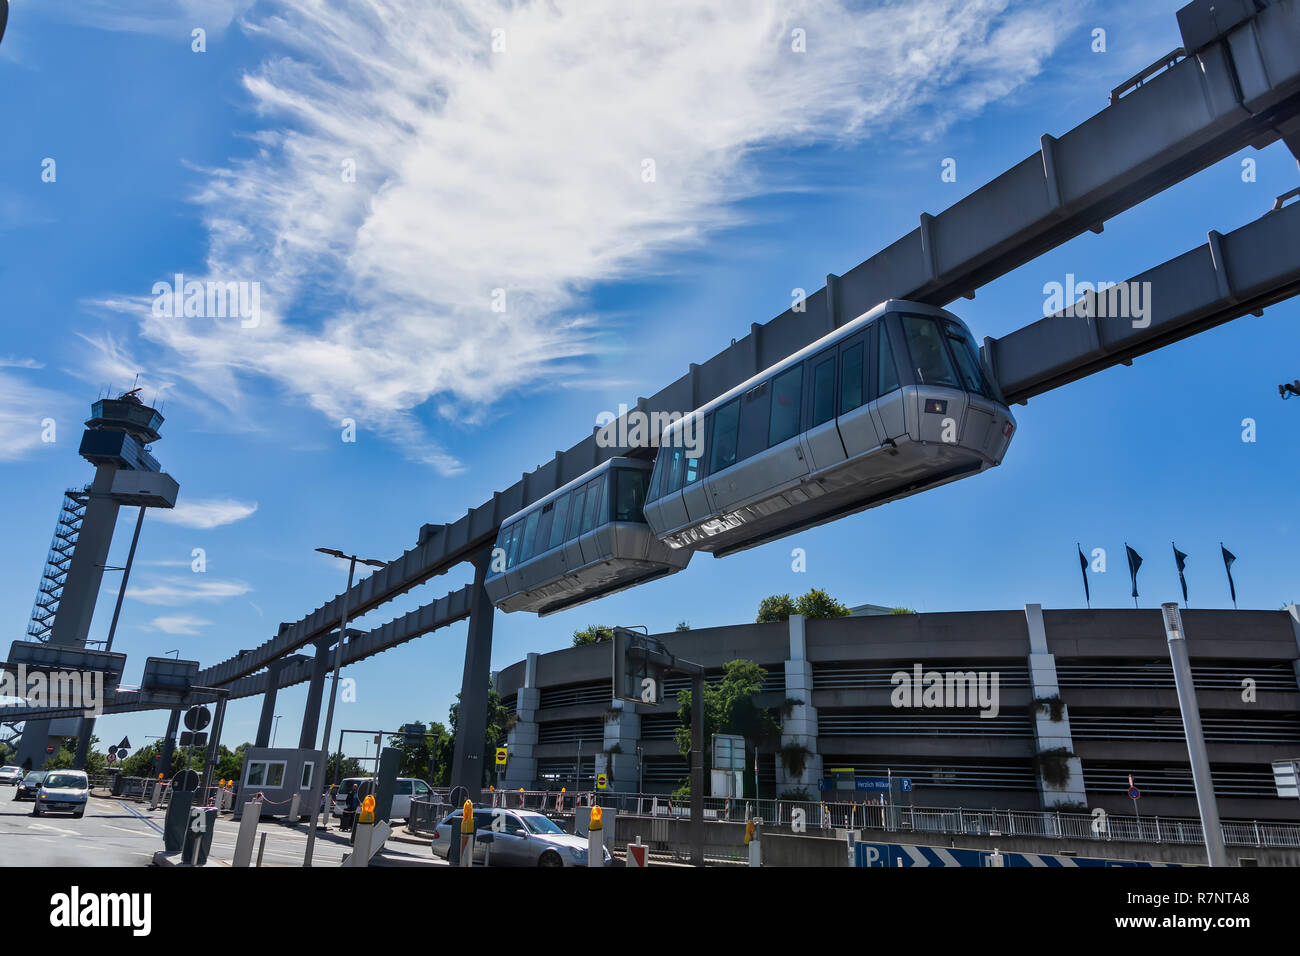 Dusseldorf, Germany - July 3, 2018: Public transportation system Sky-Train hanging from elevated guideway beam on columns in Dusseldorf, Germany. The  Stock Photo